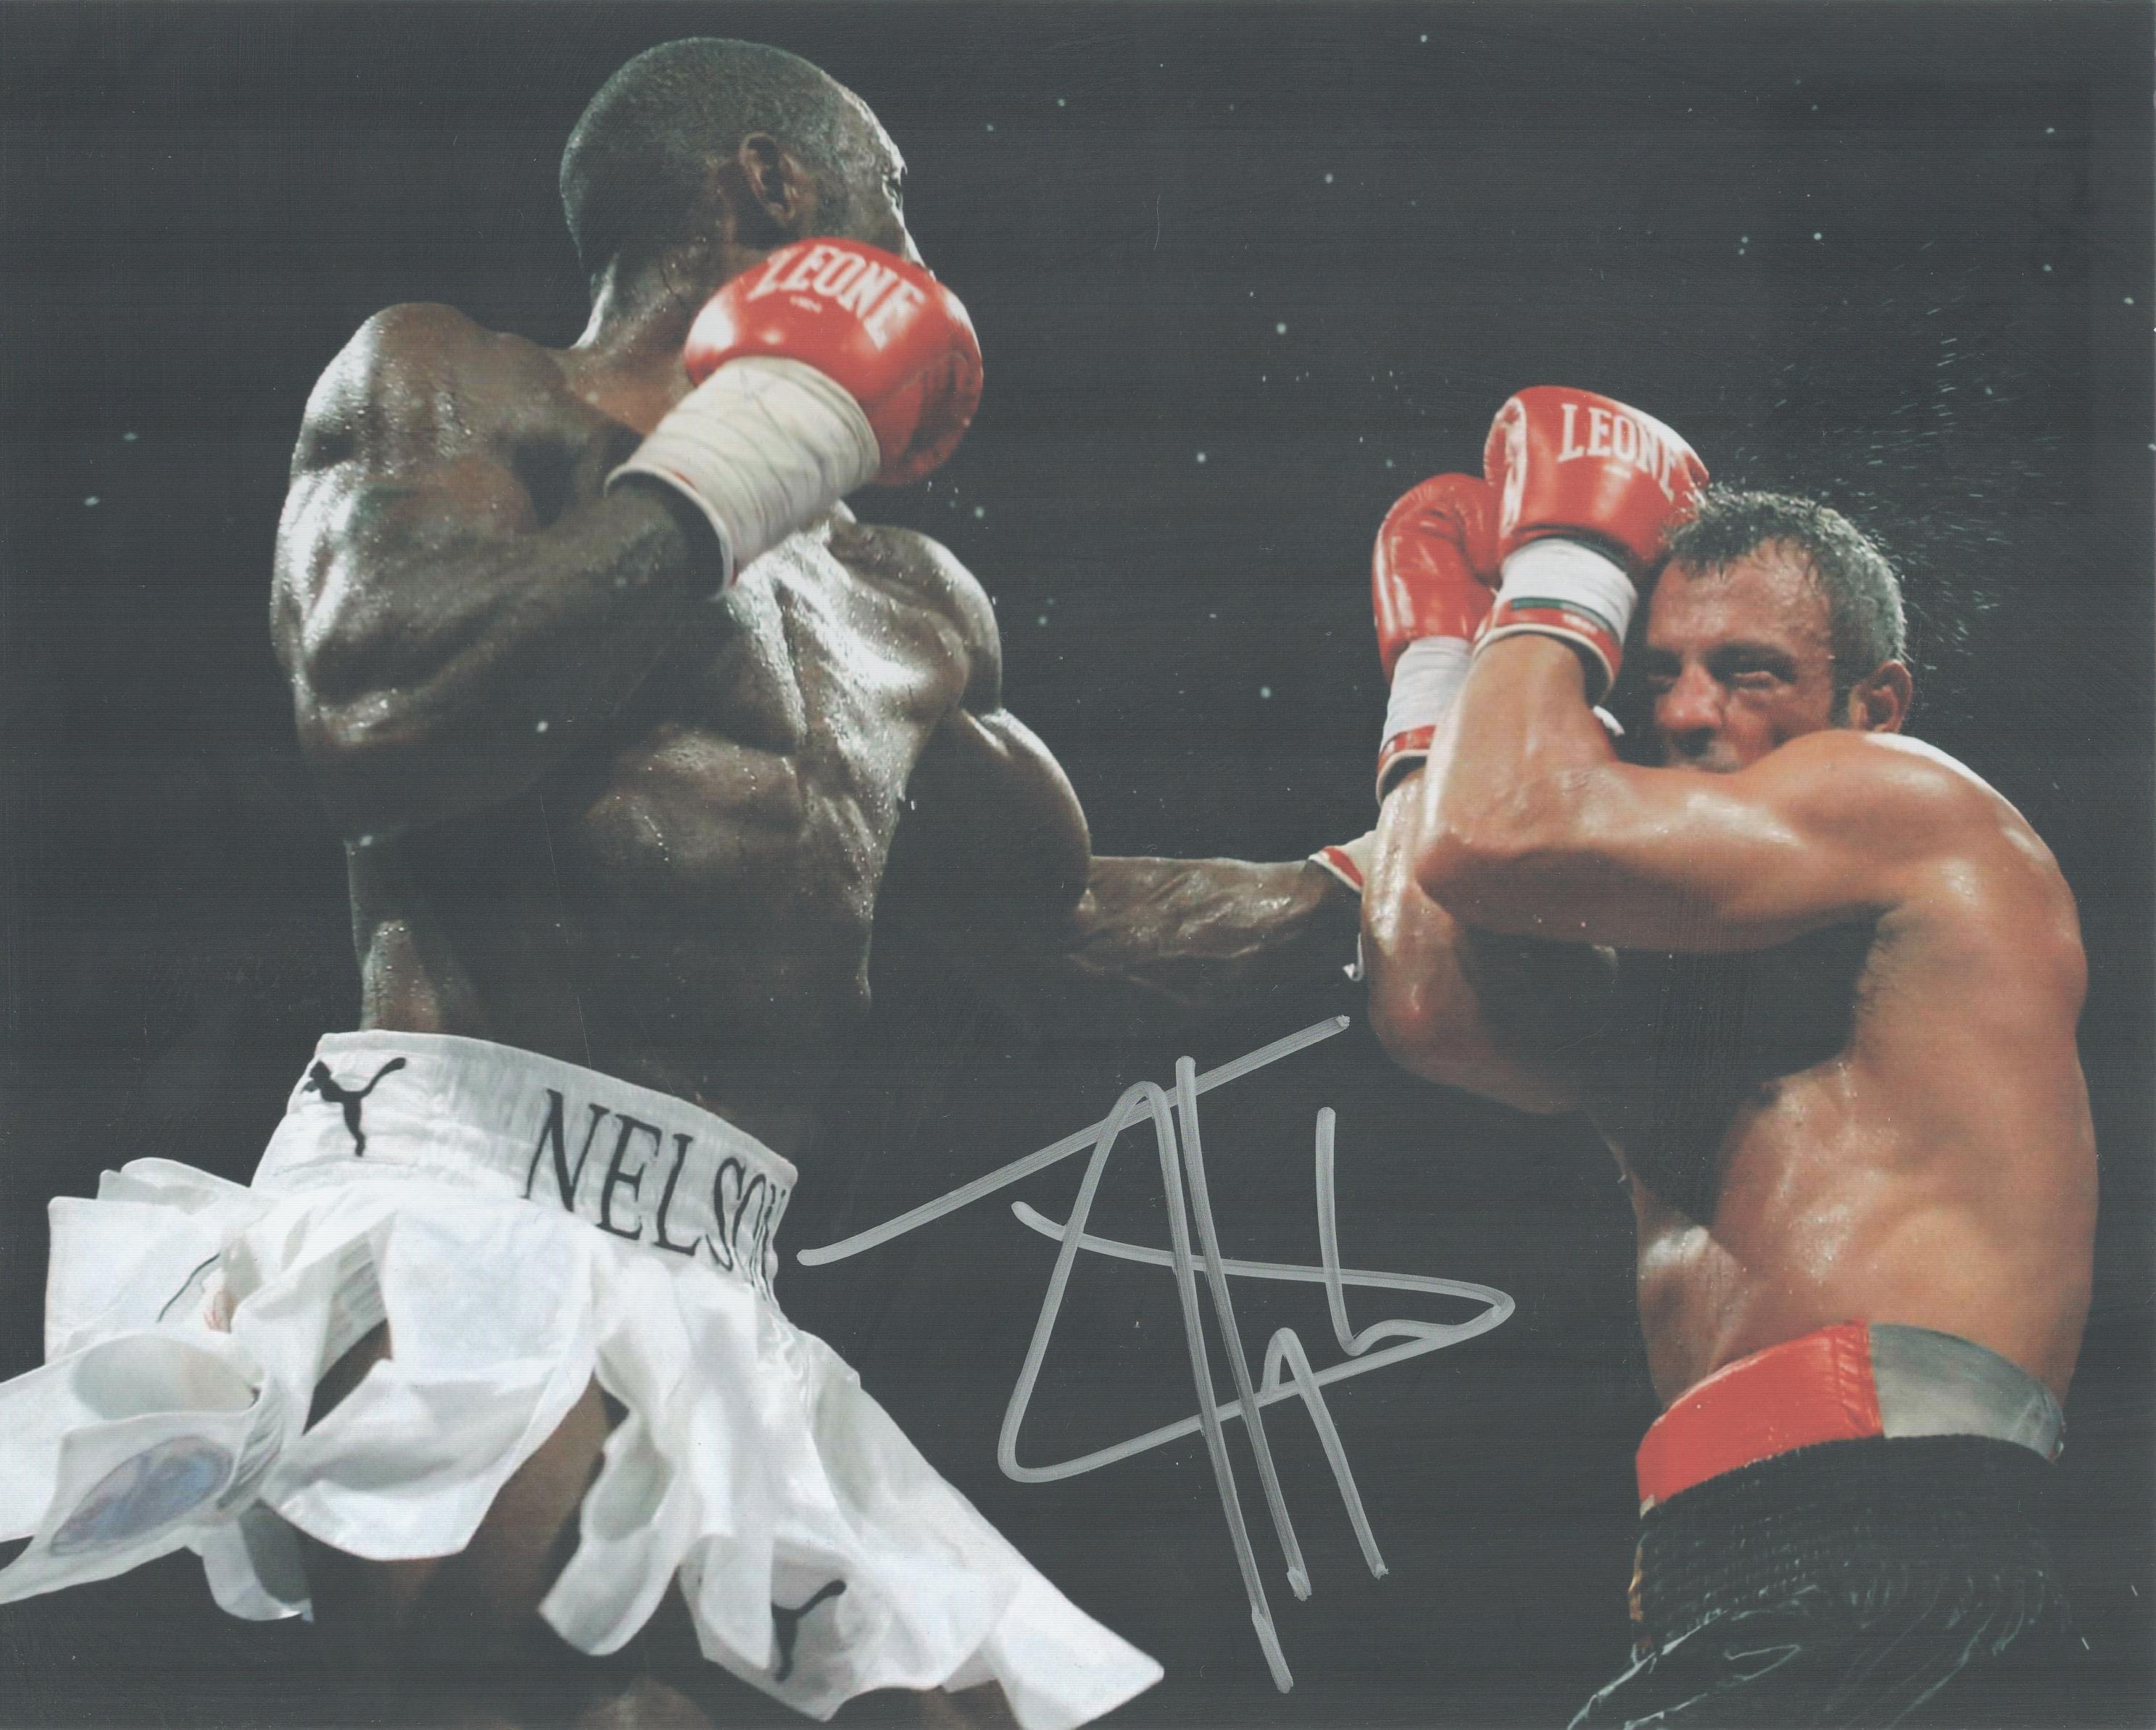 Boxing Star Johnny Nelson Signed 10x8 inch Colour In Action Photo. Good condition. All autographs